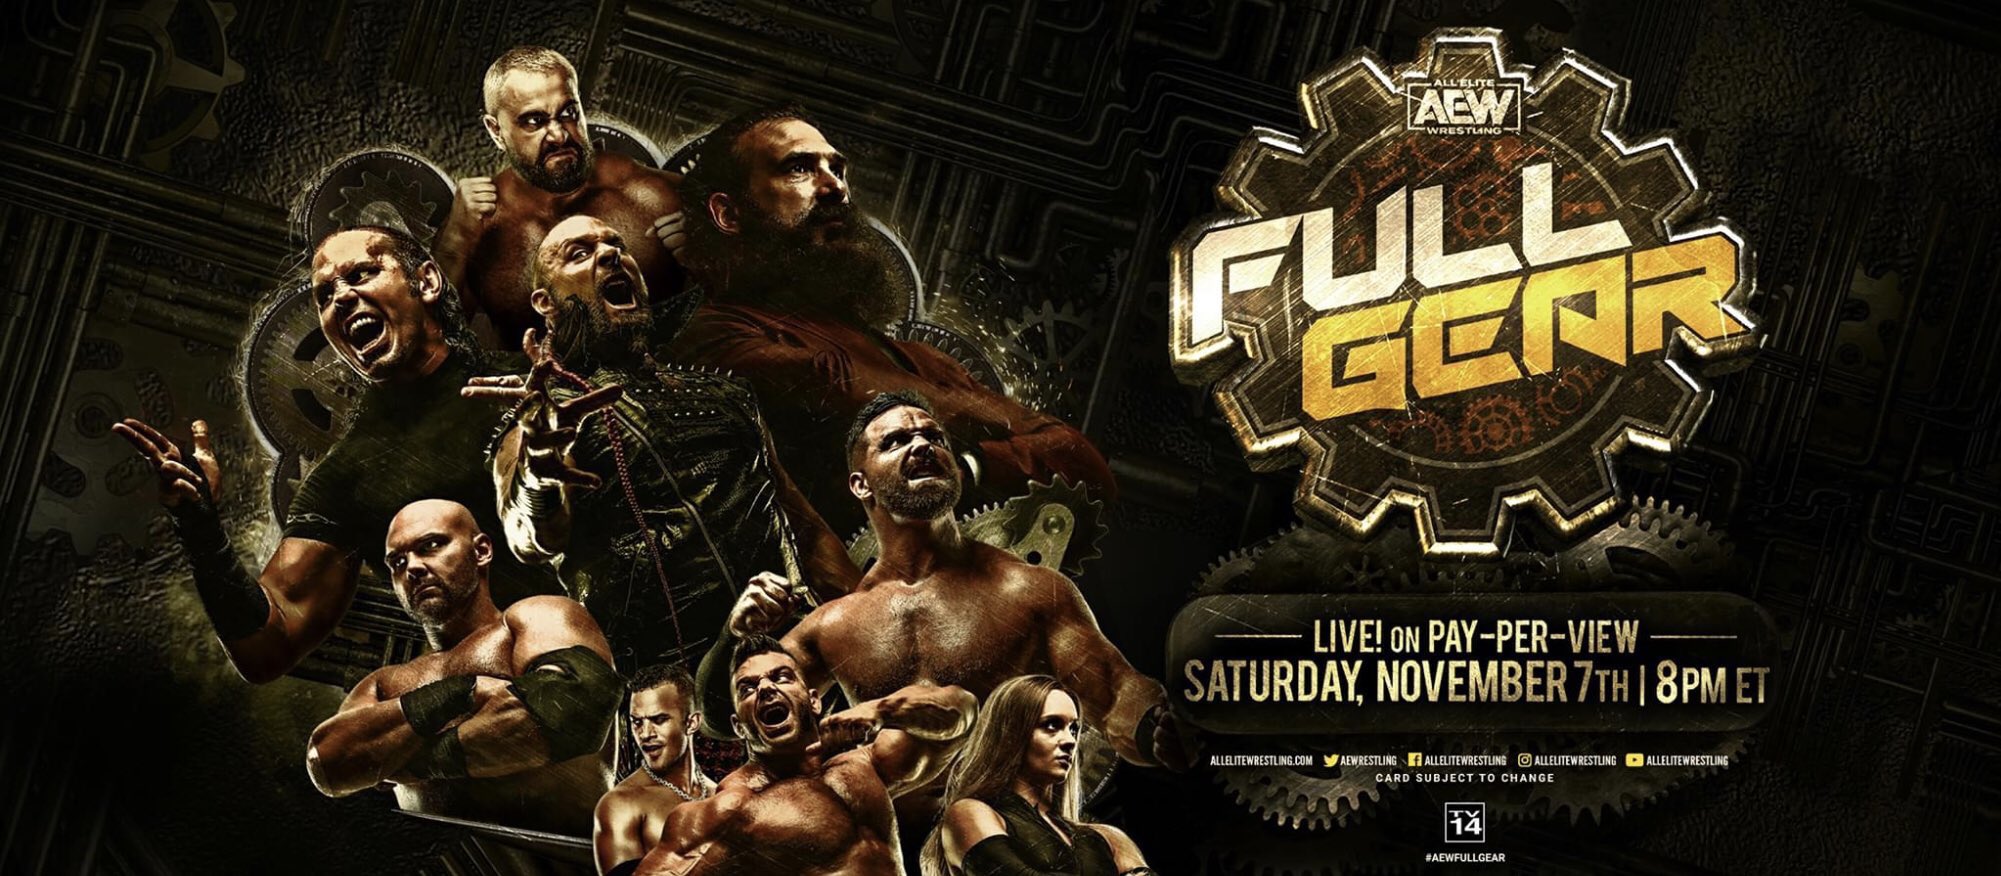 AEW Full Gear 2020 Preview: Full Card, Match Predictions & More